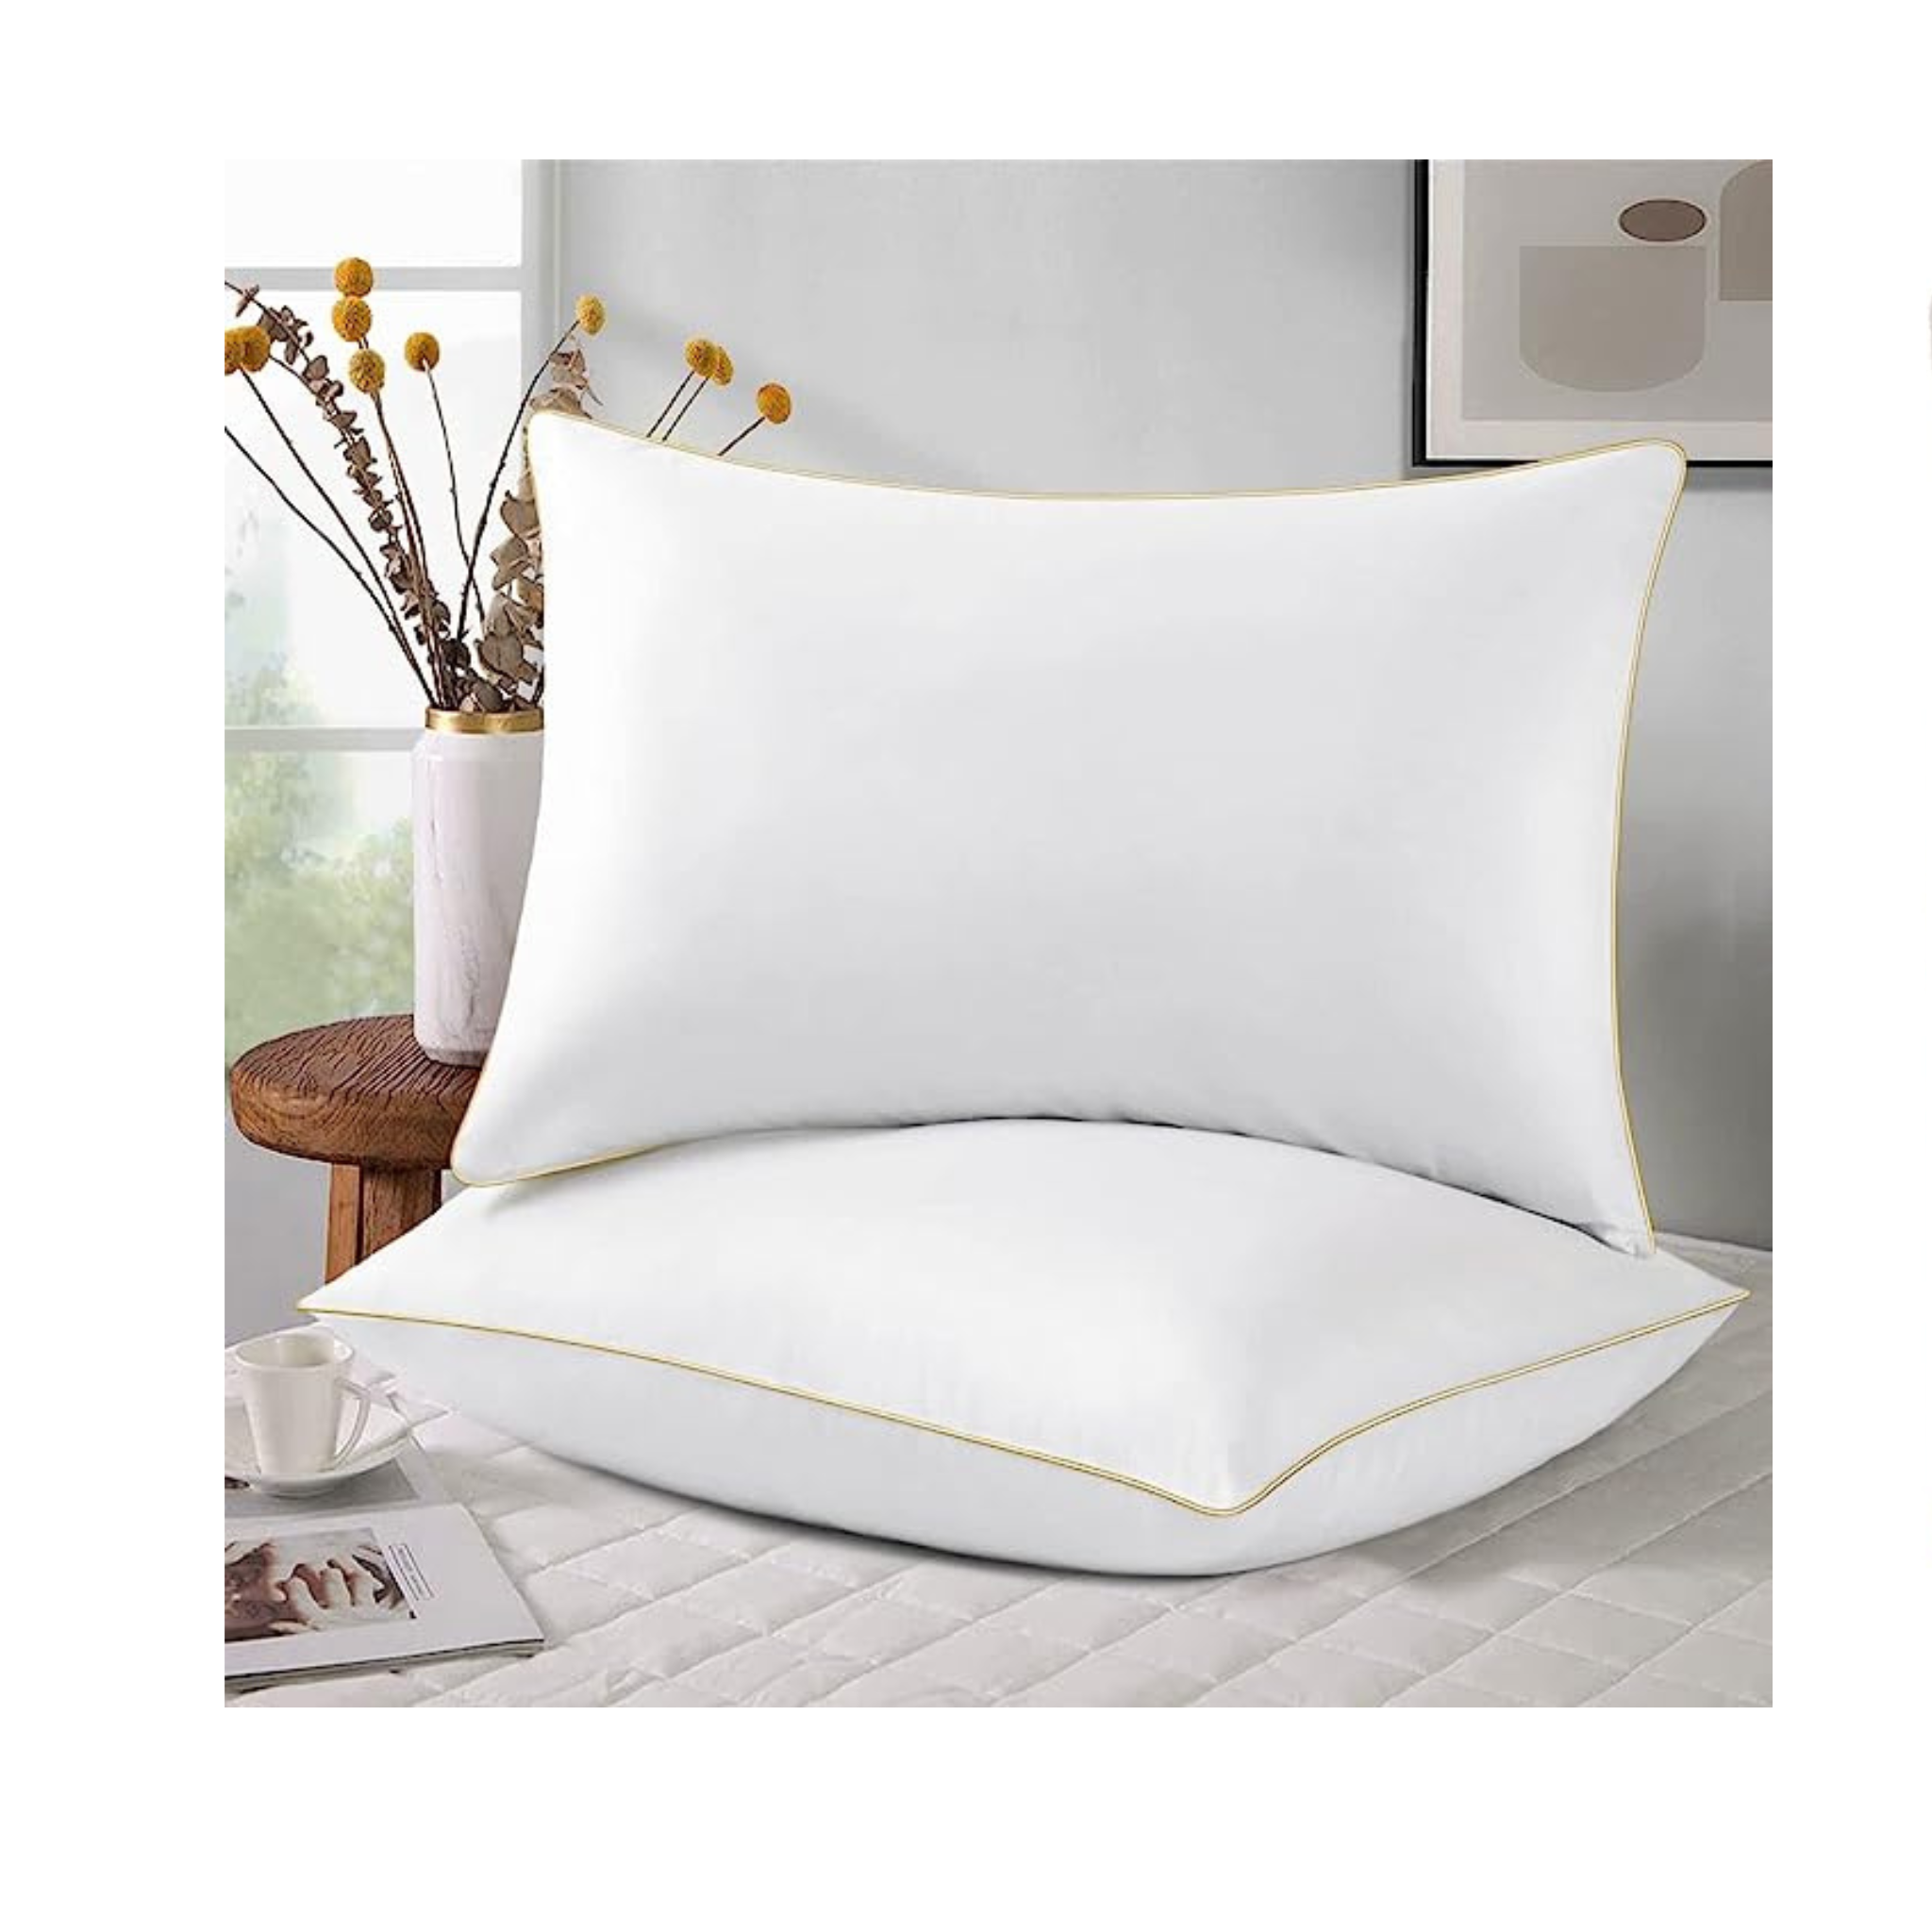 Set of 2 Queen Size Cooling Hotel Luxury Pillows